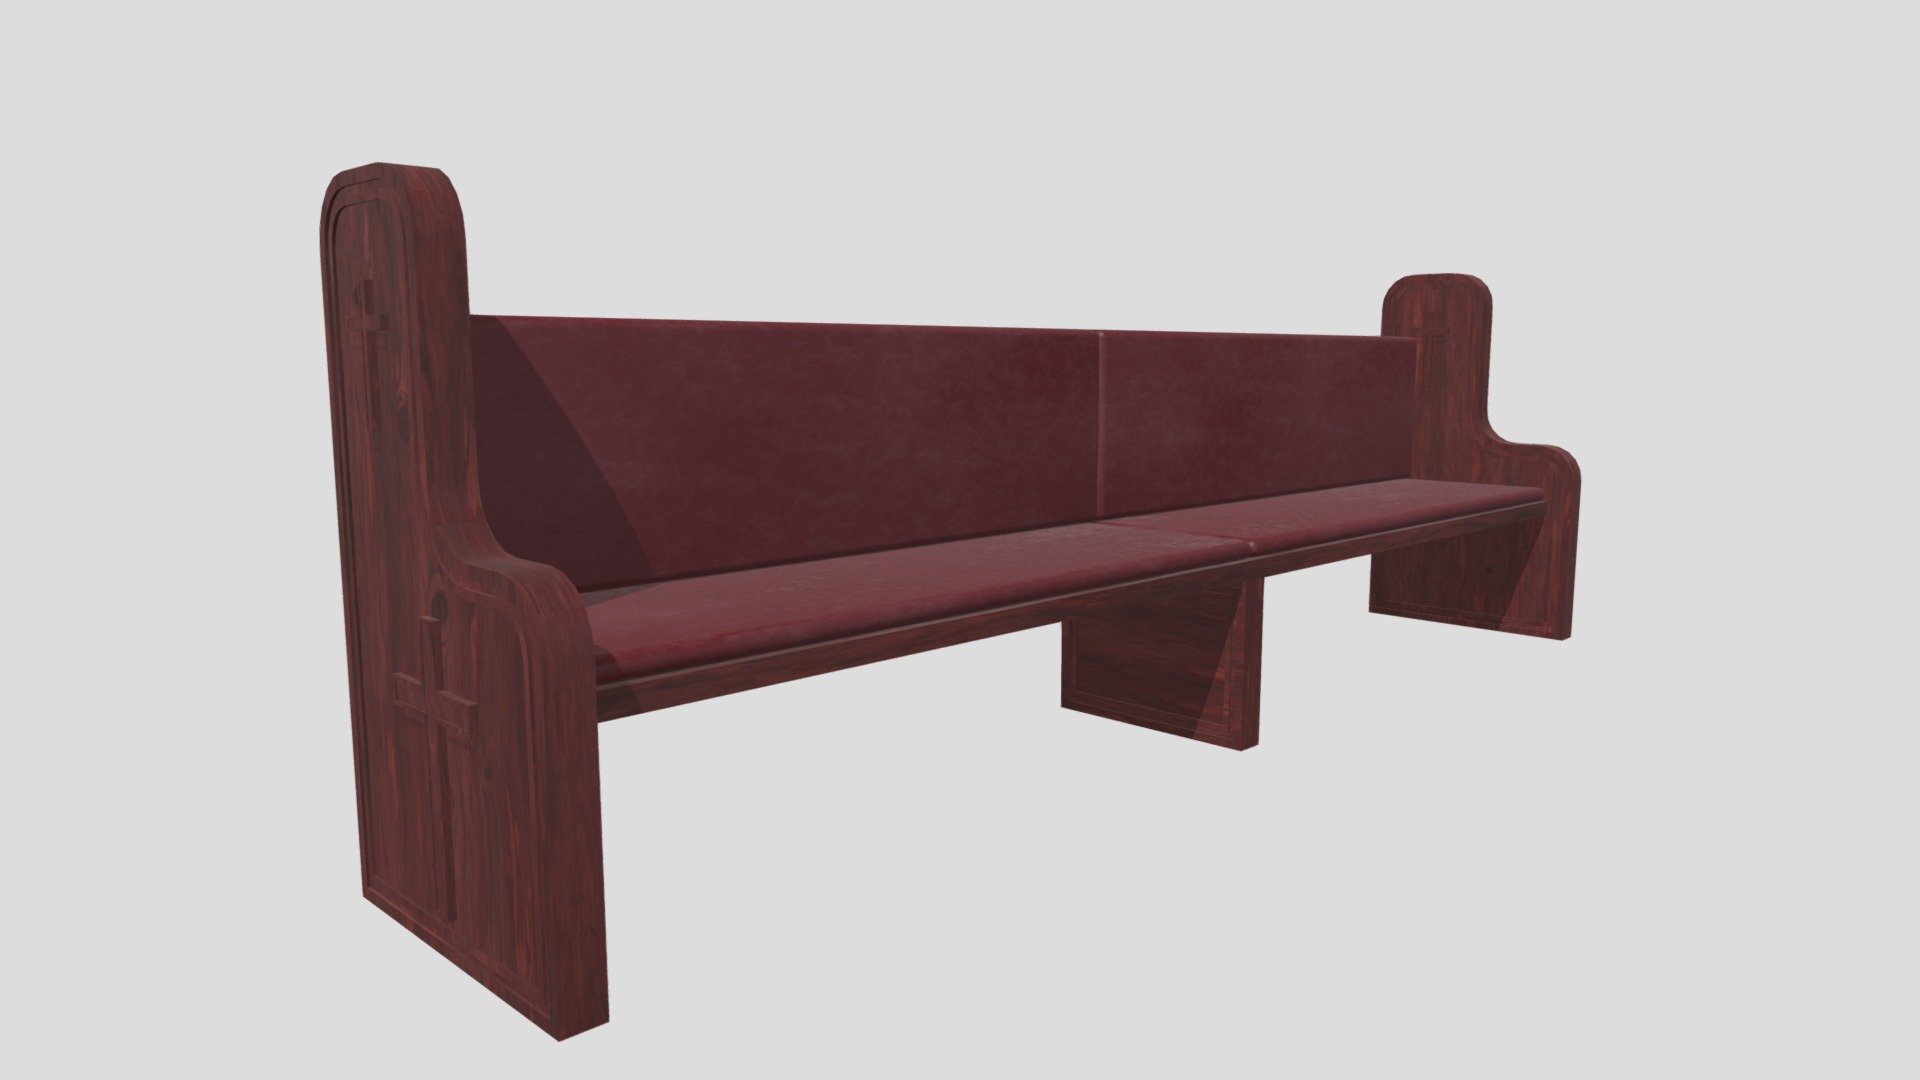 -Church Pew Bench.

-This product contains 13 models.

-This product was created in Blender 2.8.

-vertices: 2,162, polygons: 2,078.

-Formats: blend, fbx, obj, c4d, dae, fbx,unity.

-We hope you enjoy this model.

-Thank you 3d model